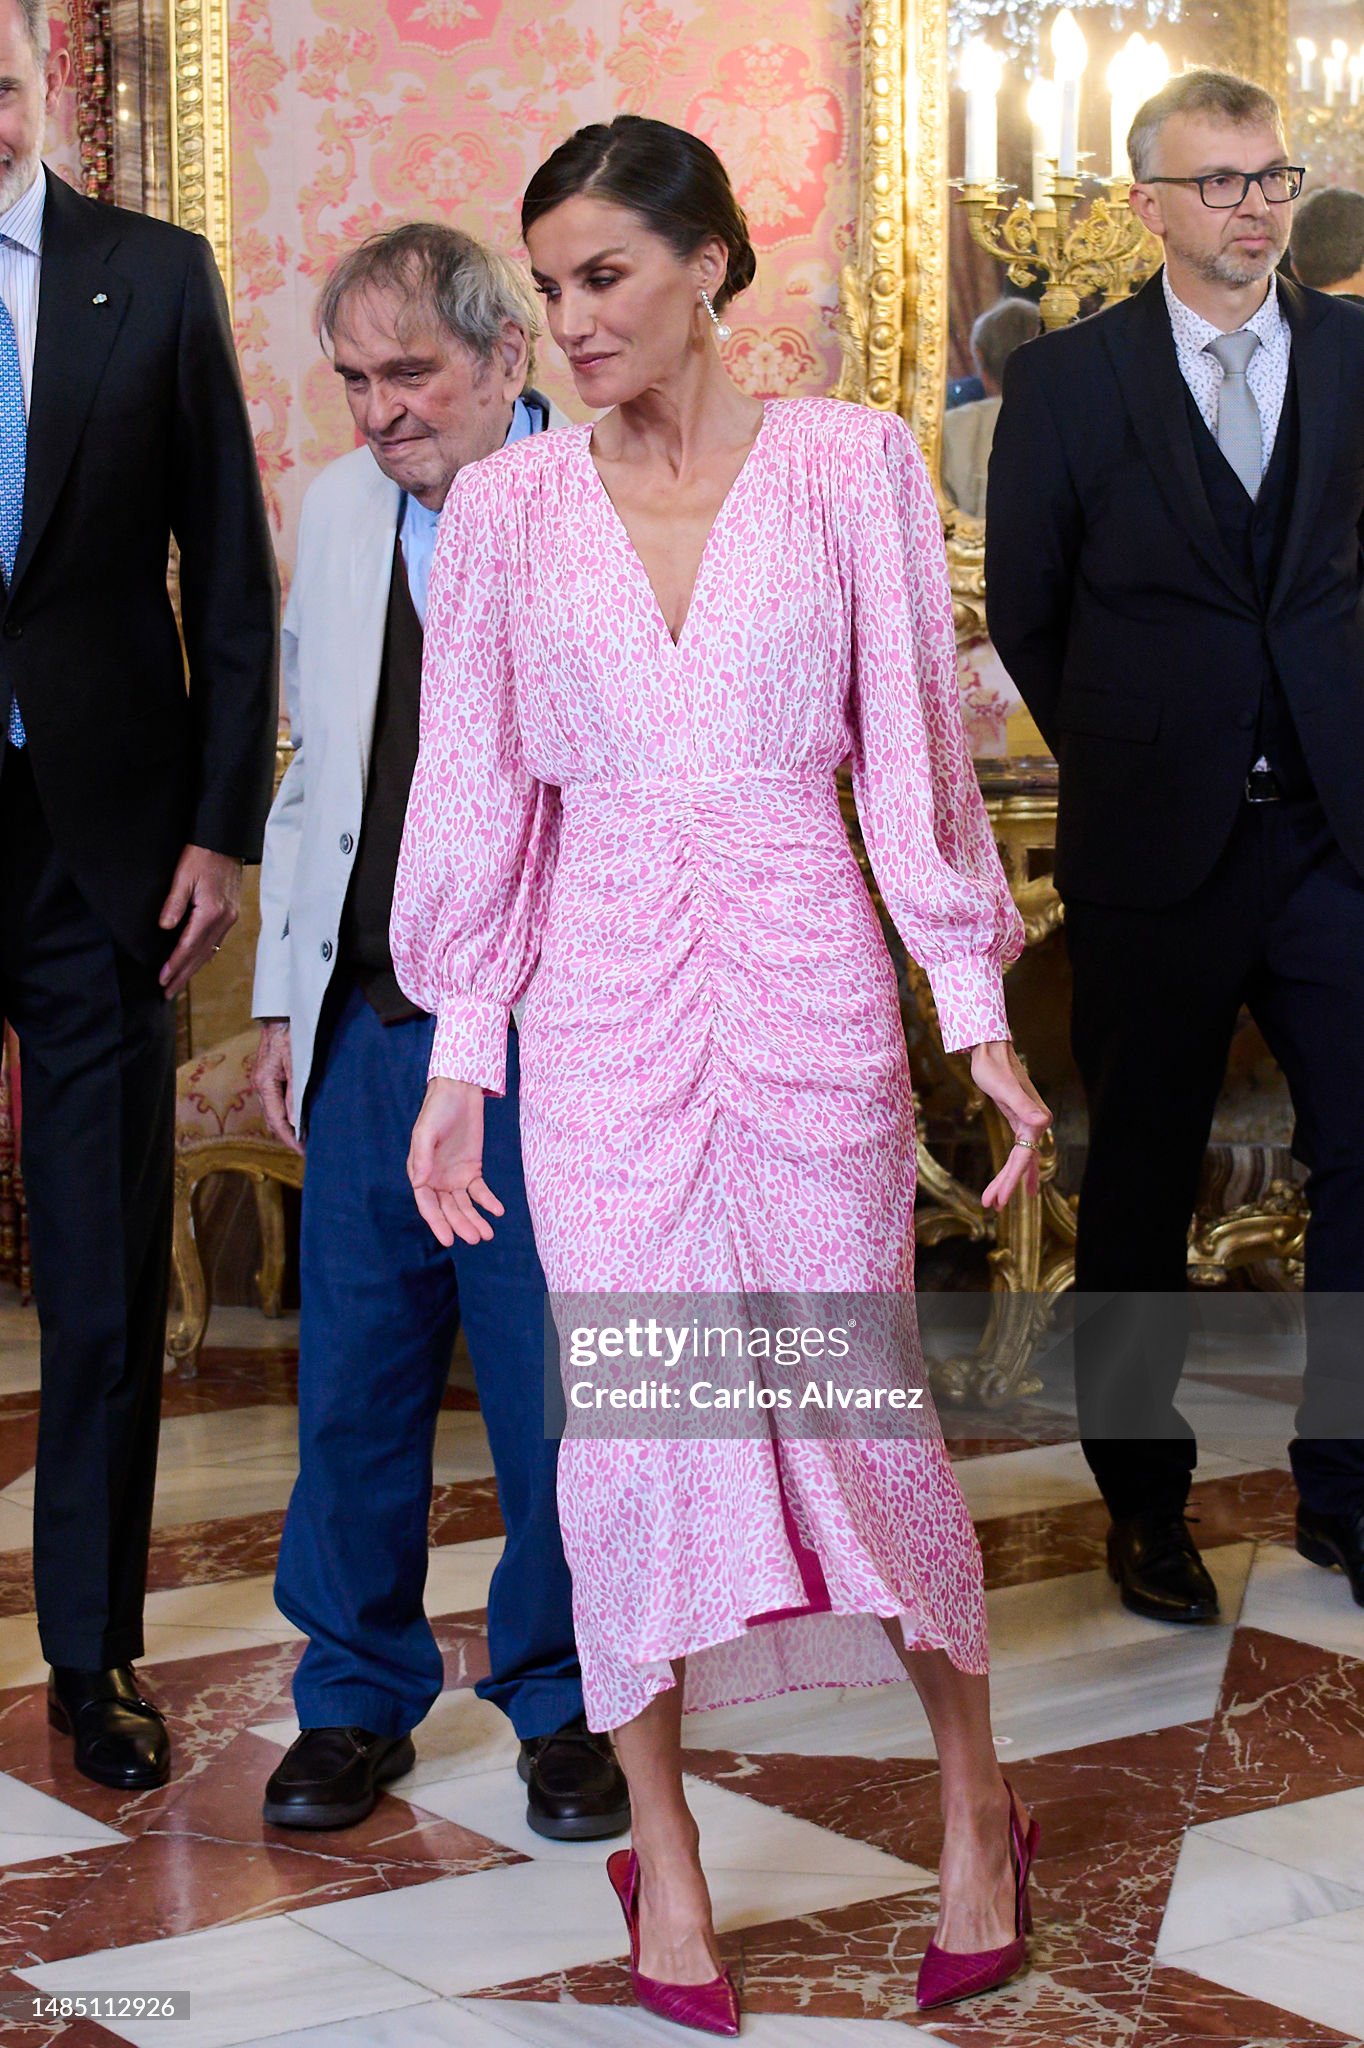 queen-letizia-of-spain-attends-a-luncheon-for-world-literature-members-on-the-occassion-of-the.jpg